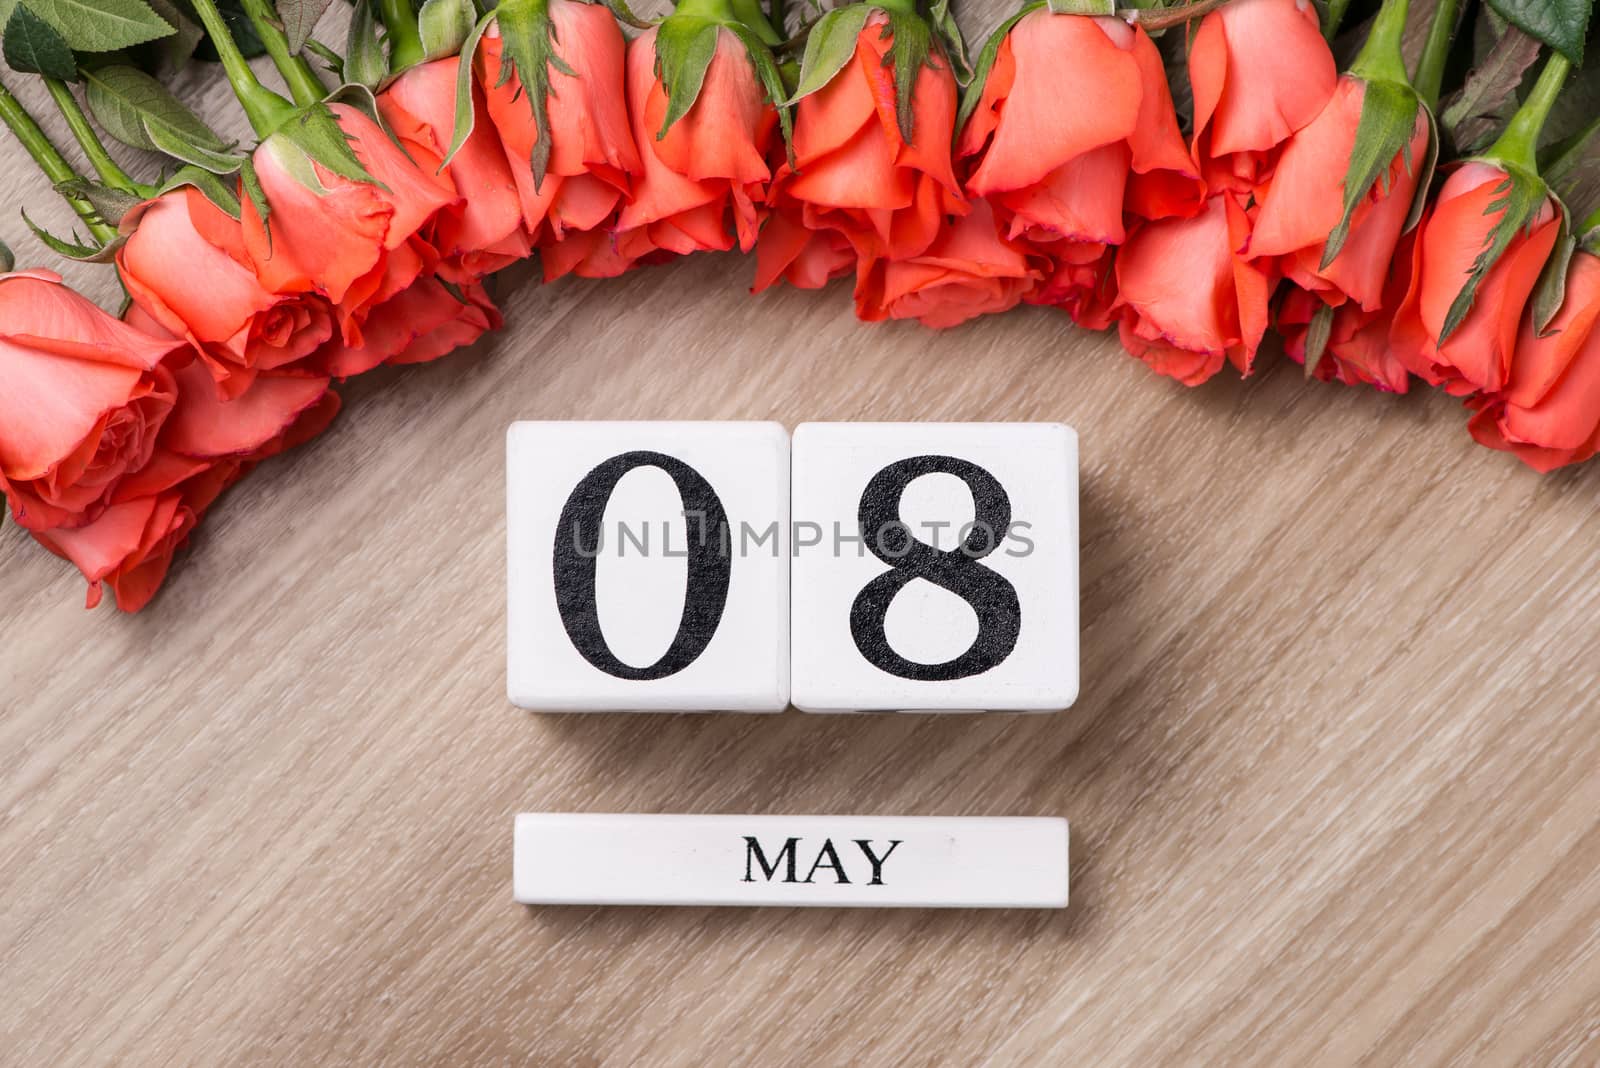 Cube shape calendar for MAY 08 on wooden table with roses by makidotvn